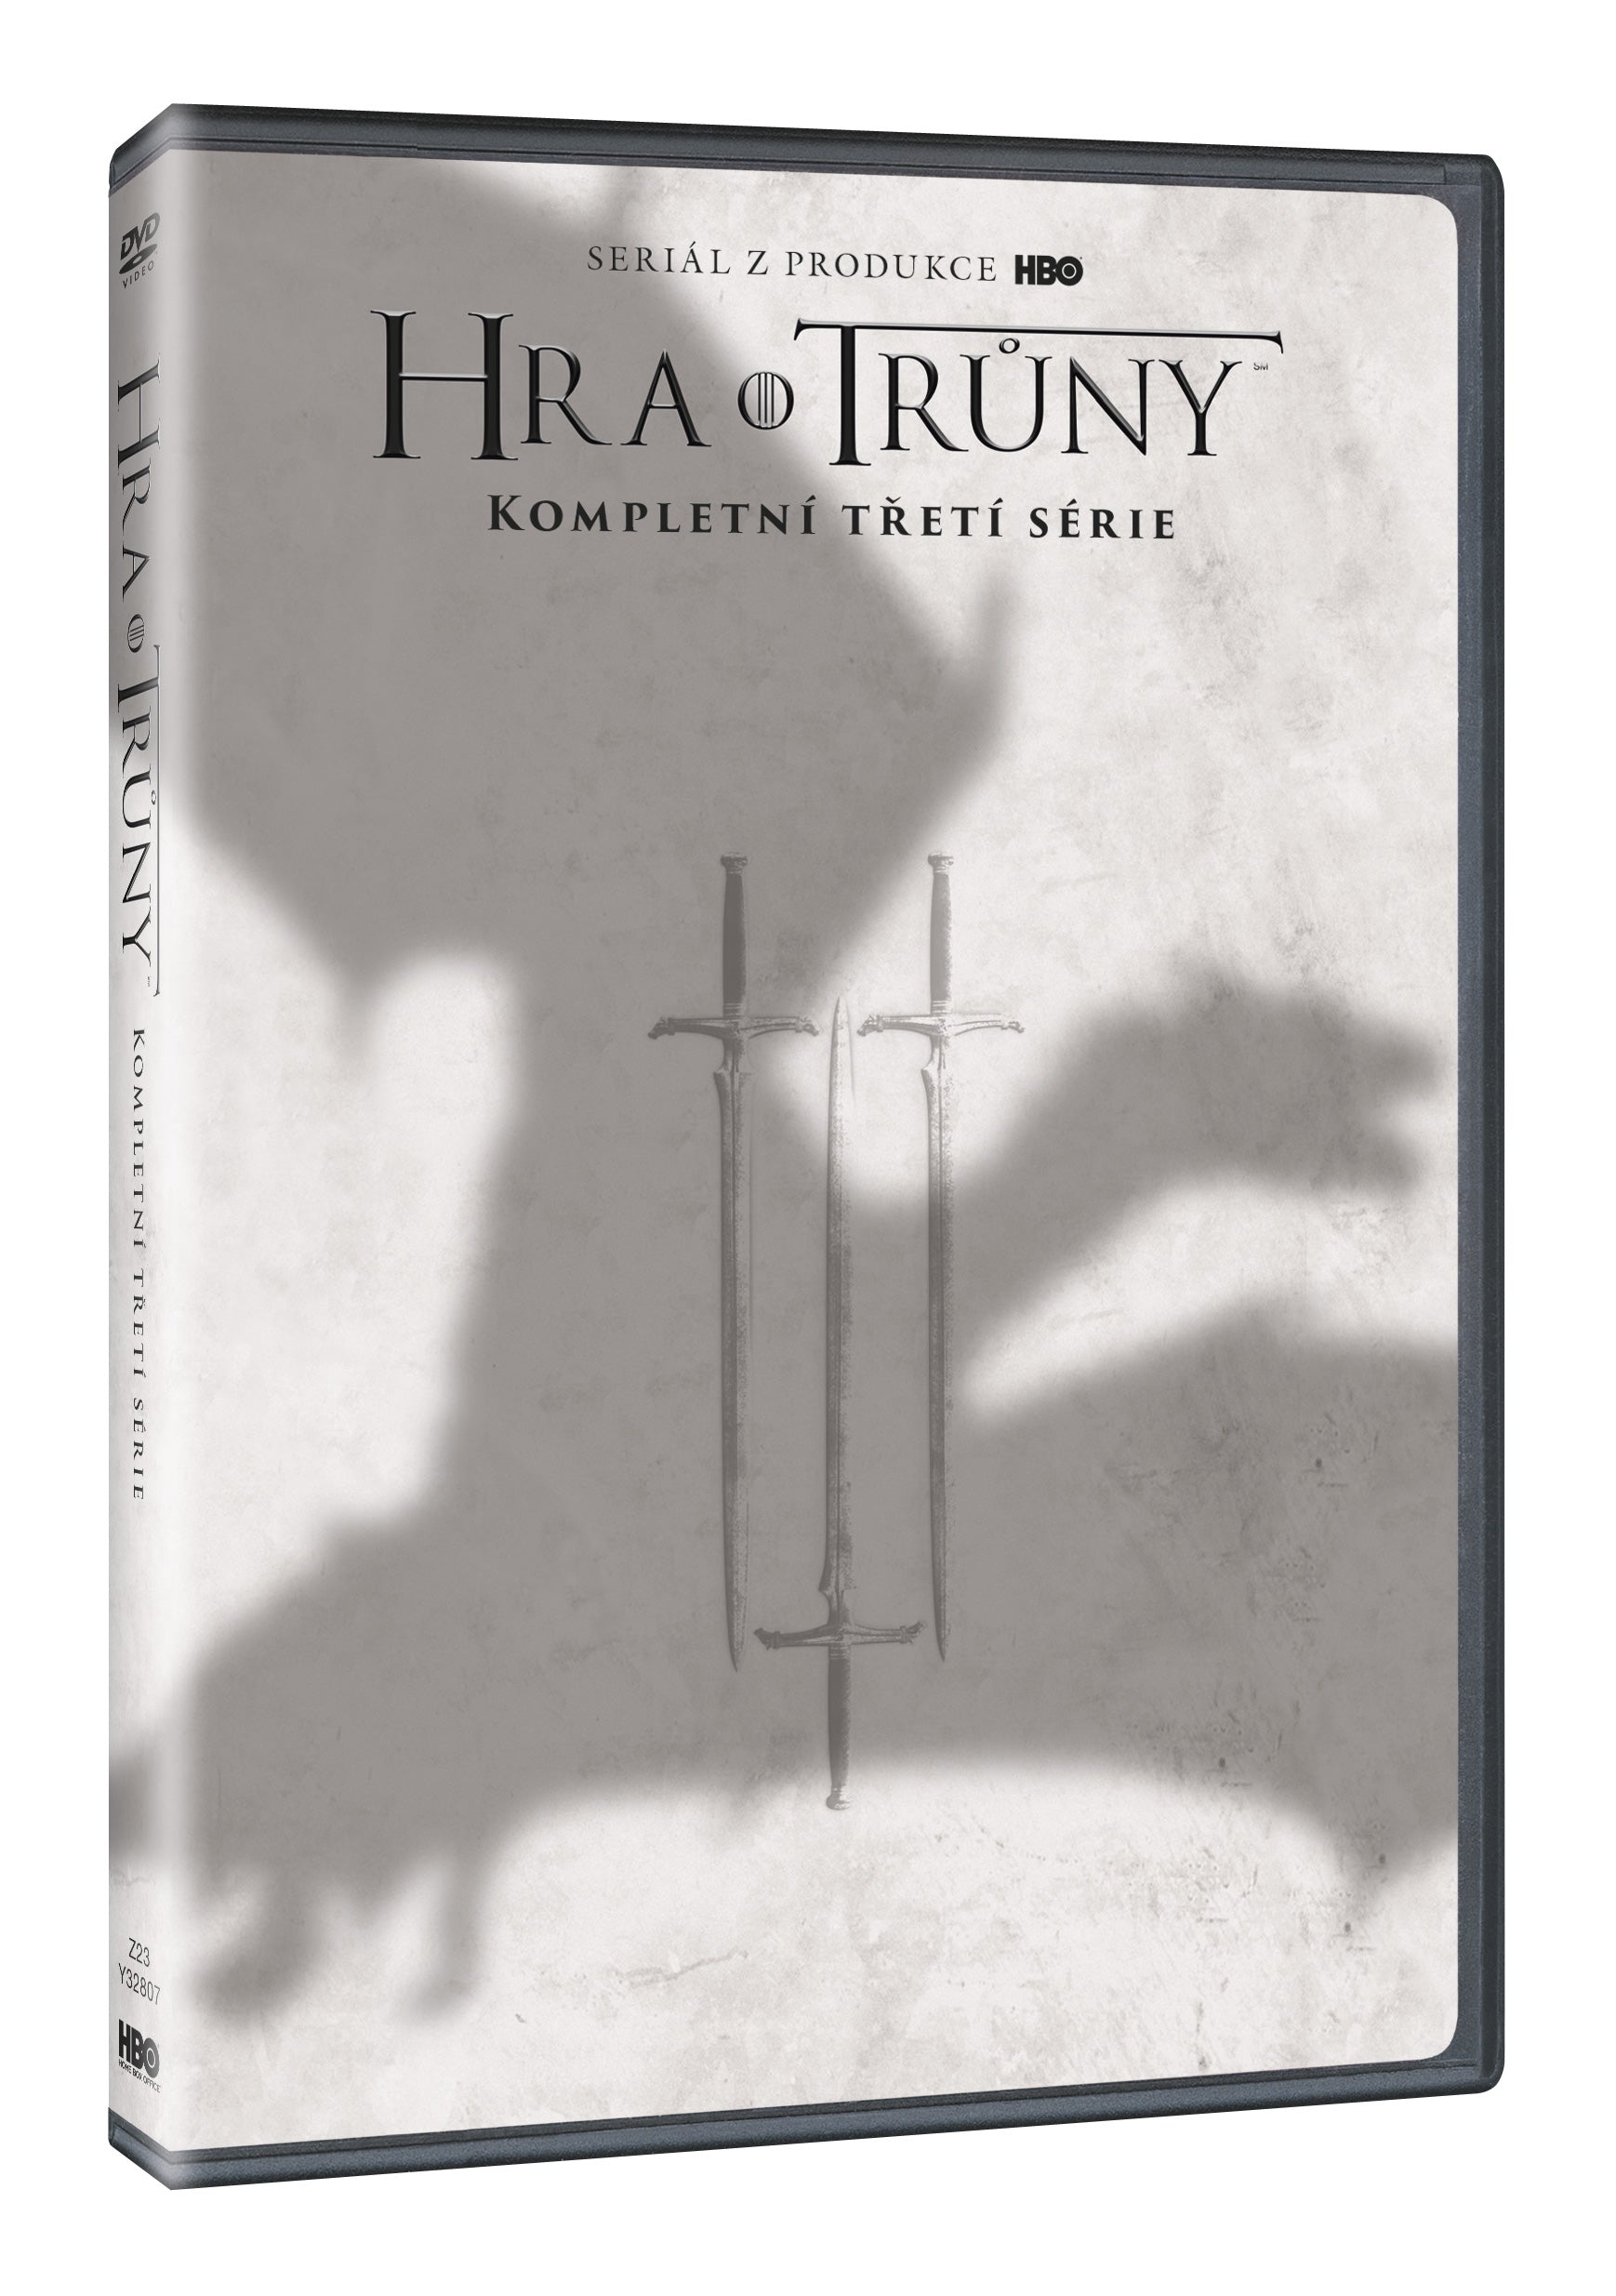 Hra o trony 3. Serie 5DVD - Multipack / Game of Thrones Staffel 3